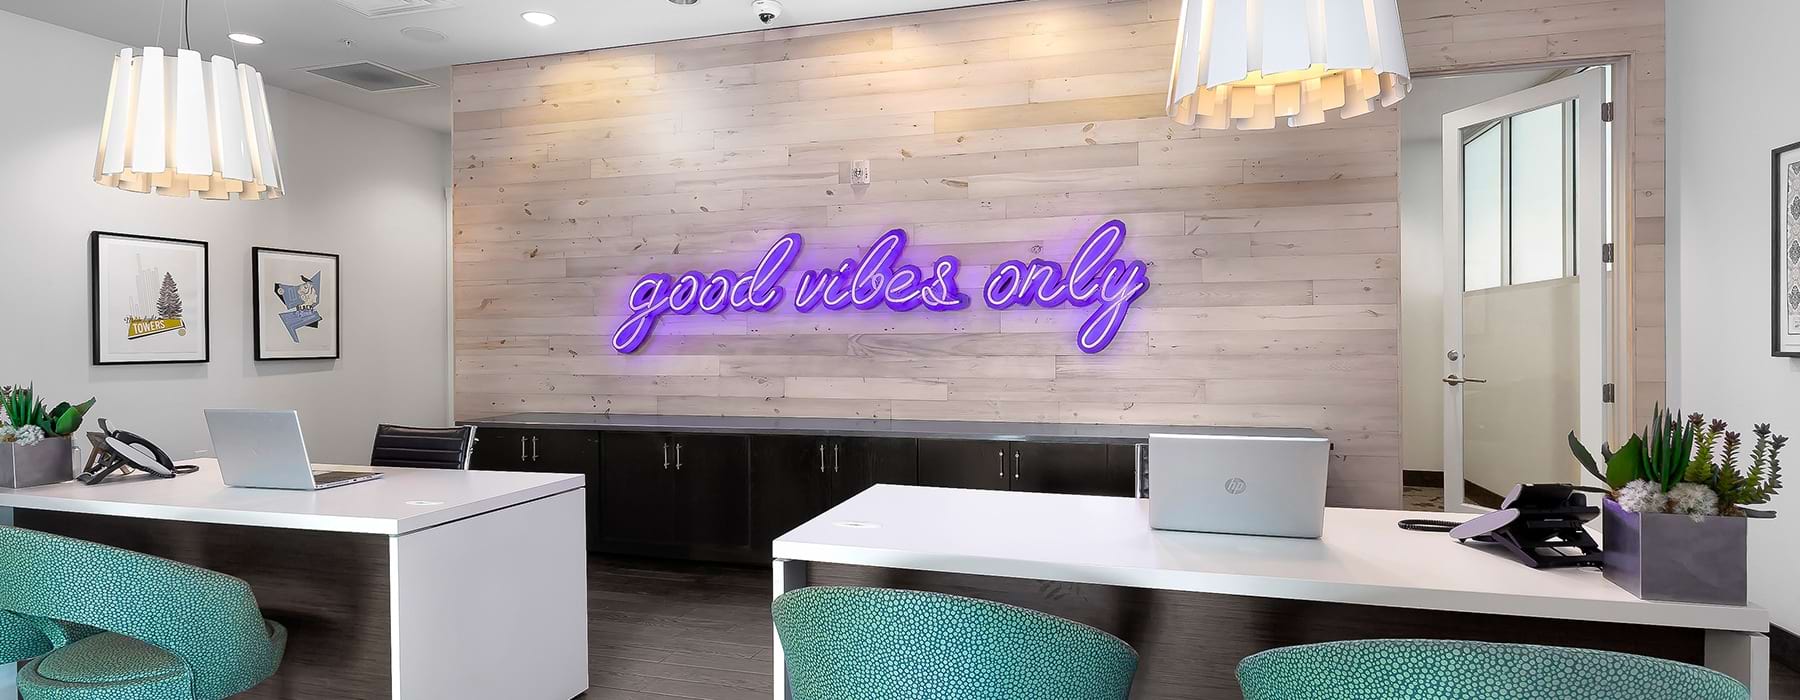 Large well lit leasing office with large neon sign 